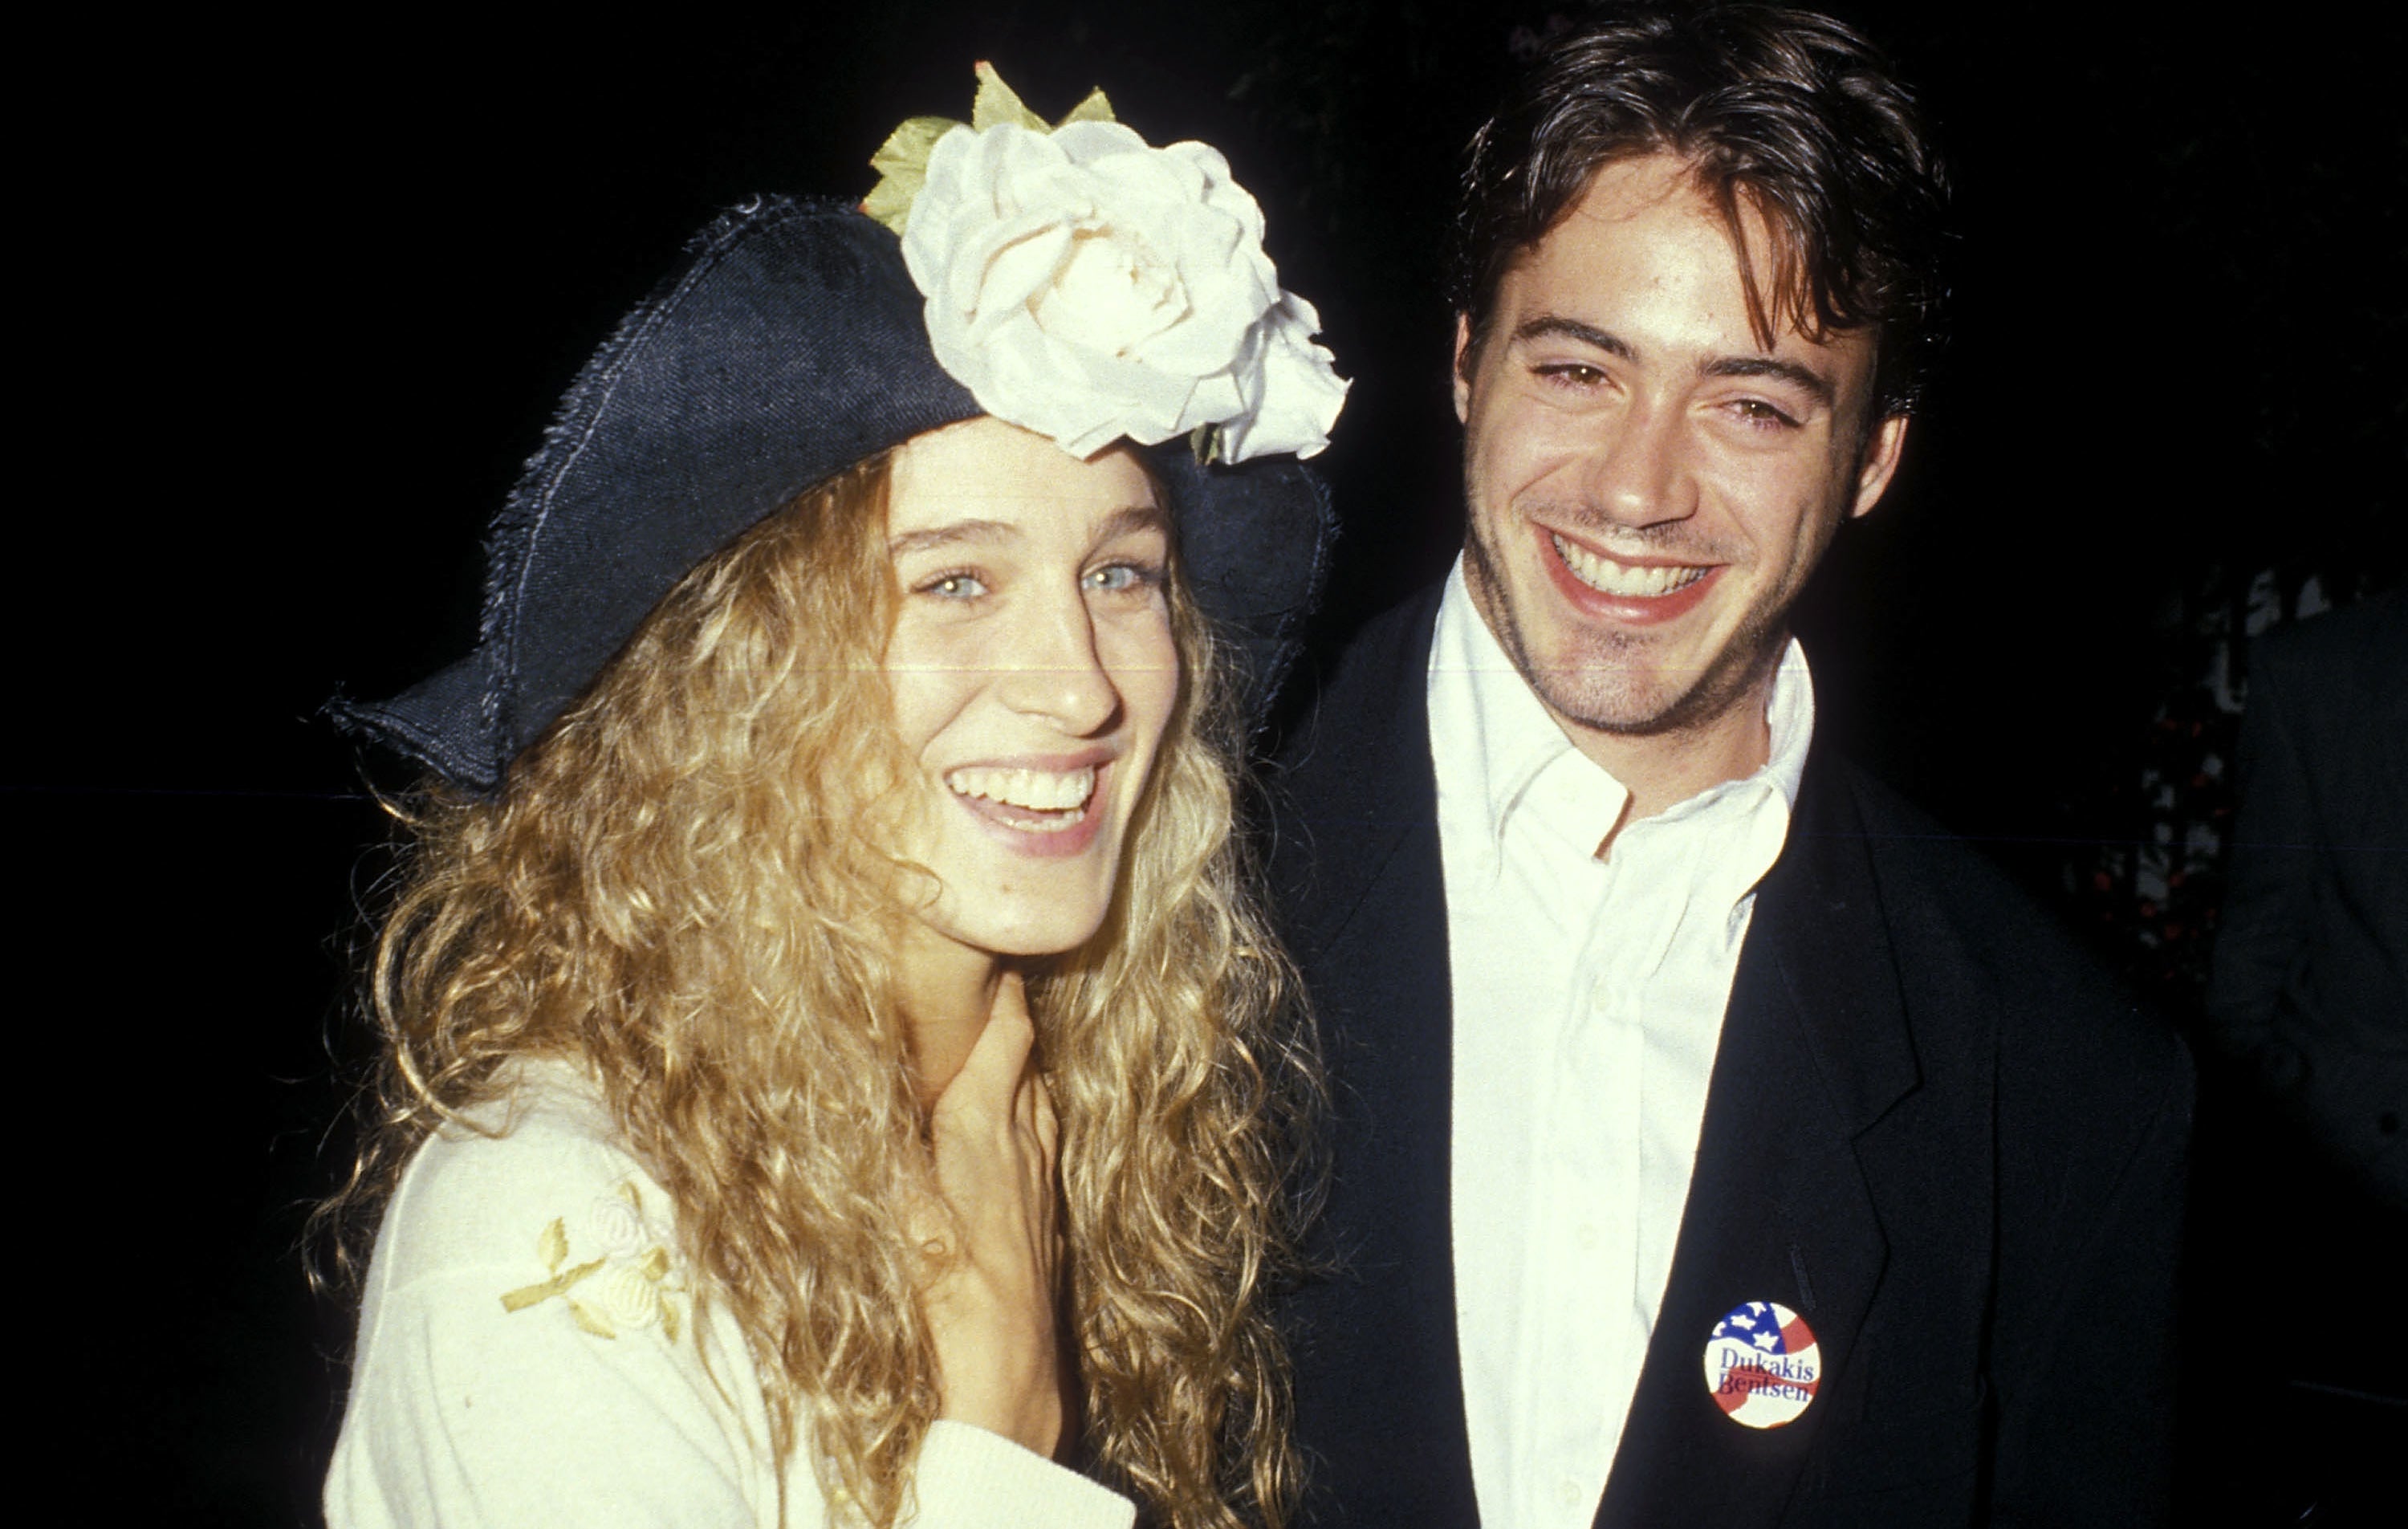 Actress Sarah Jessica Parker and actor Robert Downey, Jr. attend the 1988 Presidential Campaign